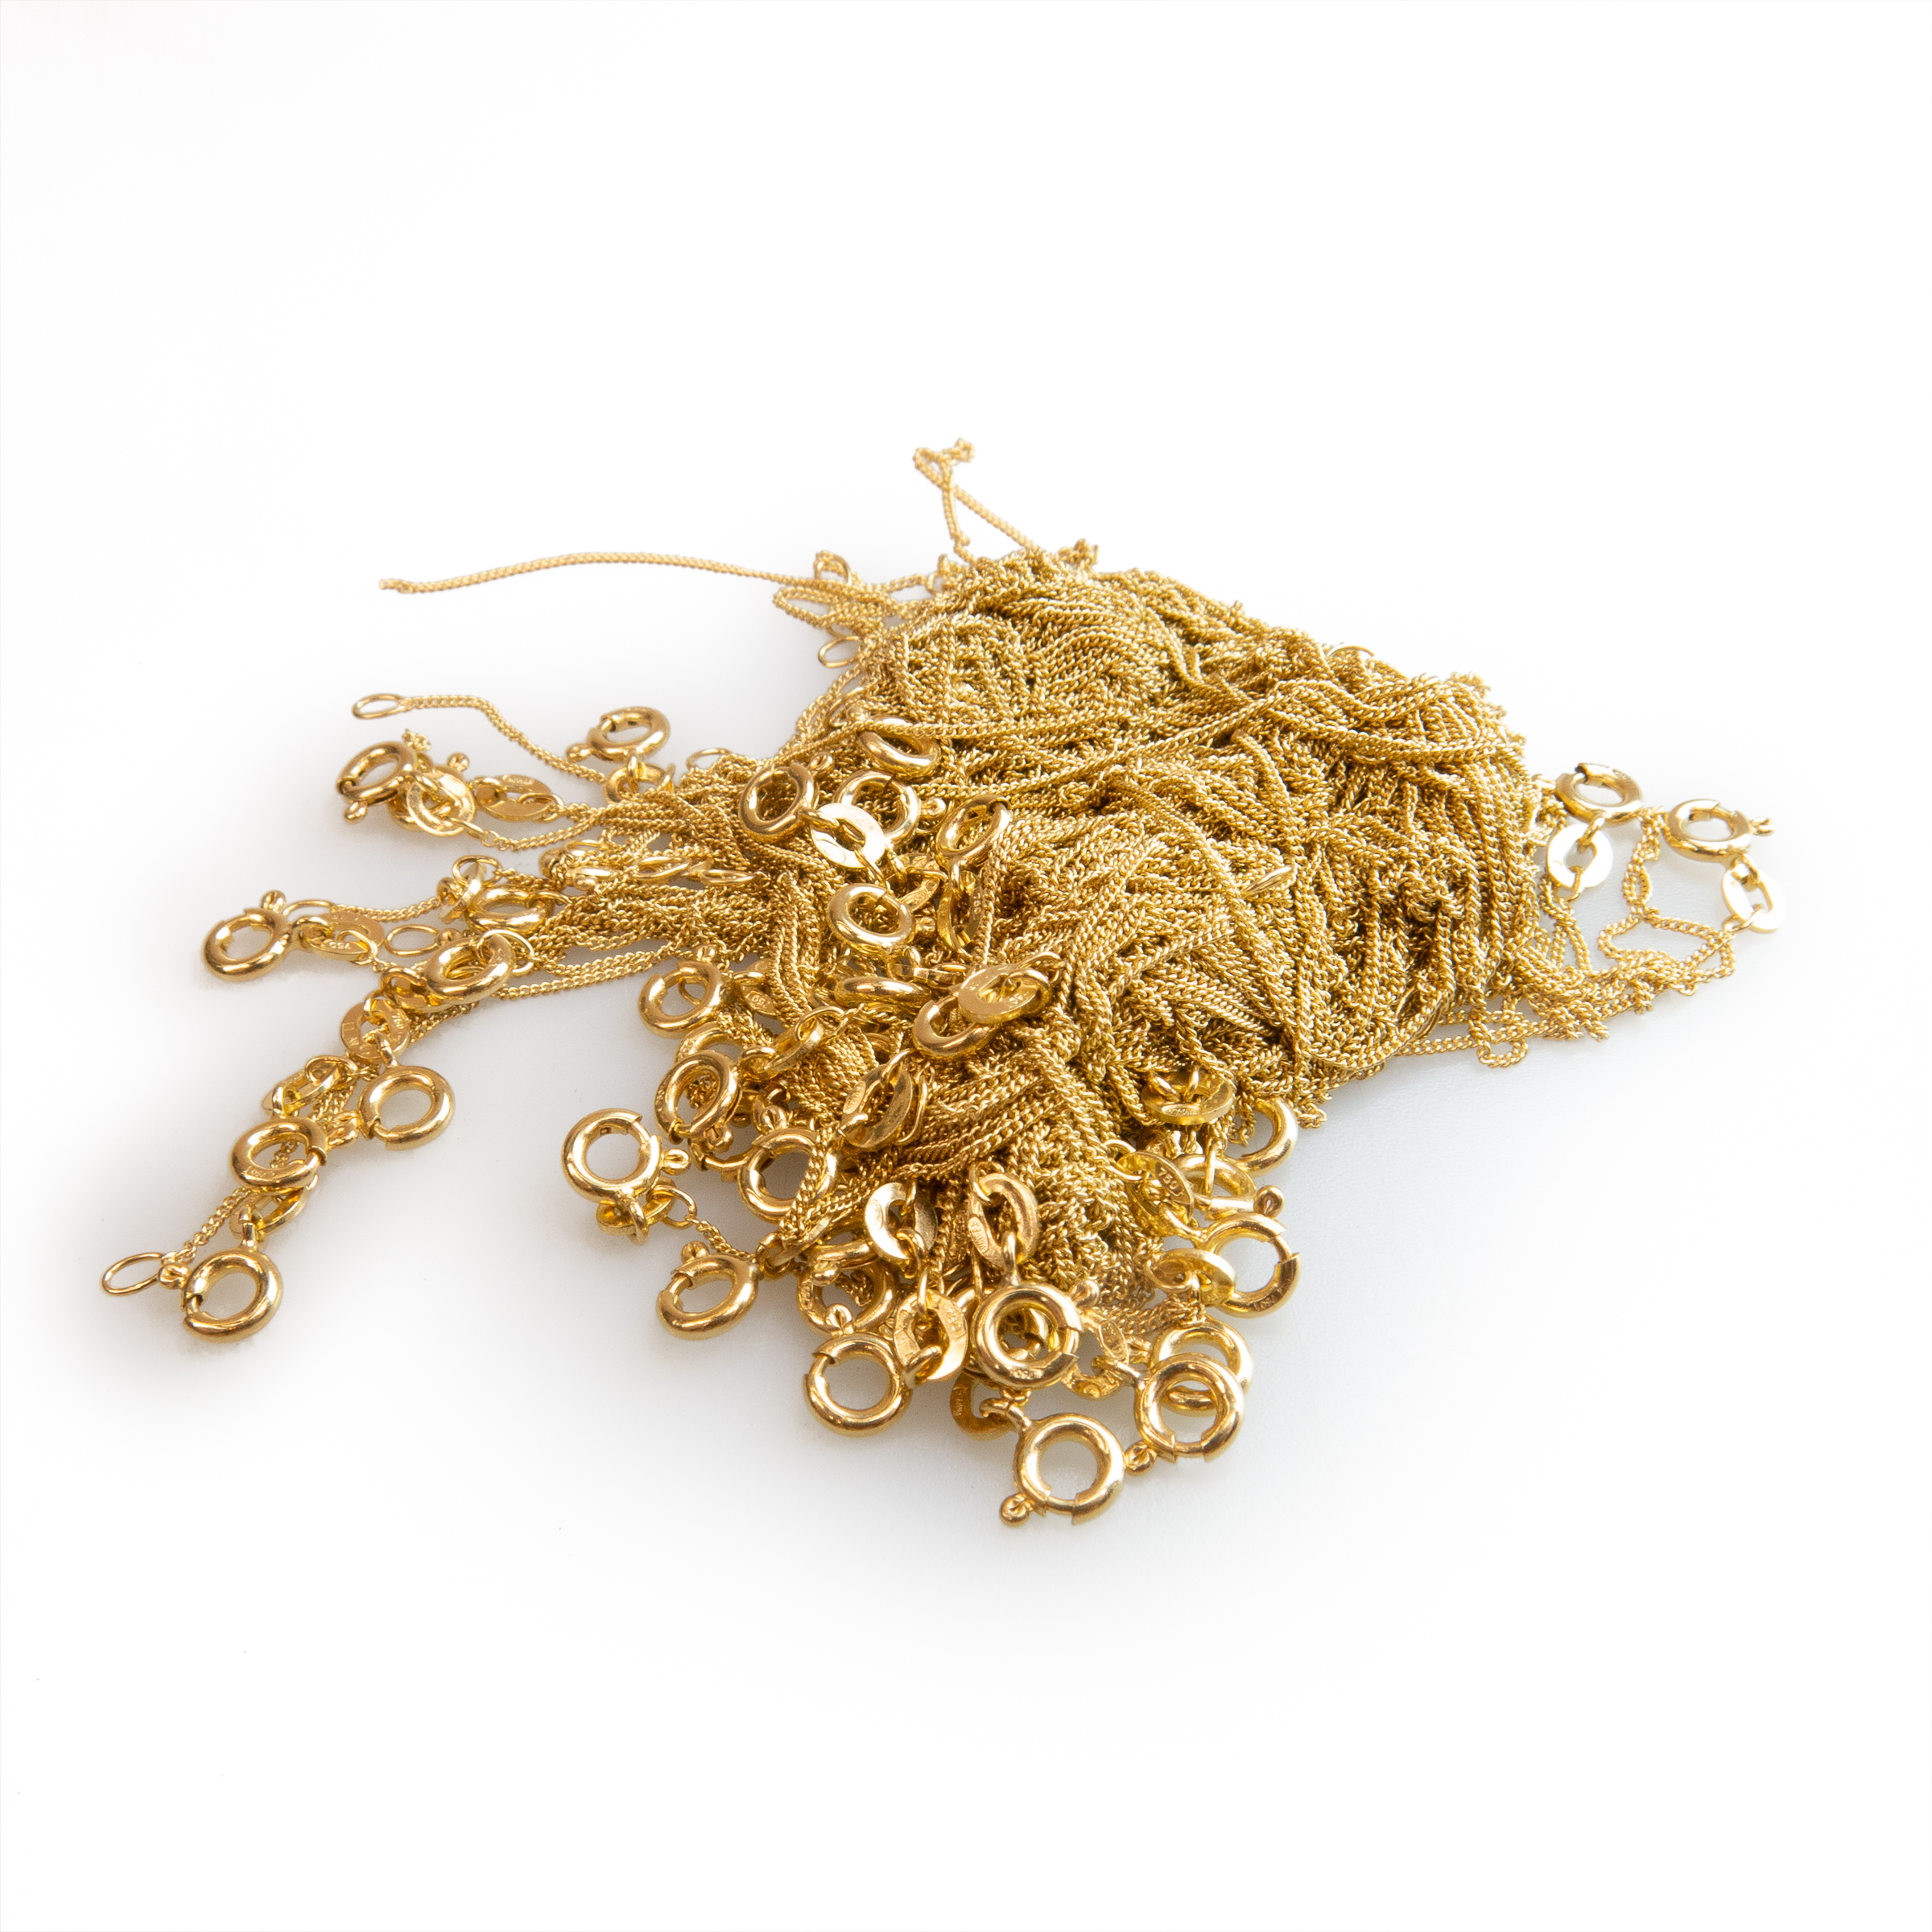 Approximately 46 x 18k Yellow Gold Fine Chains